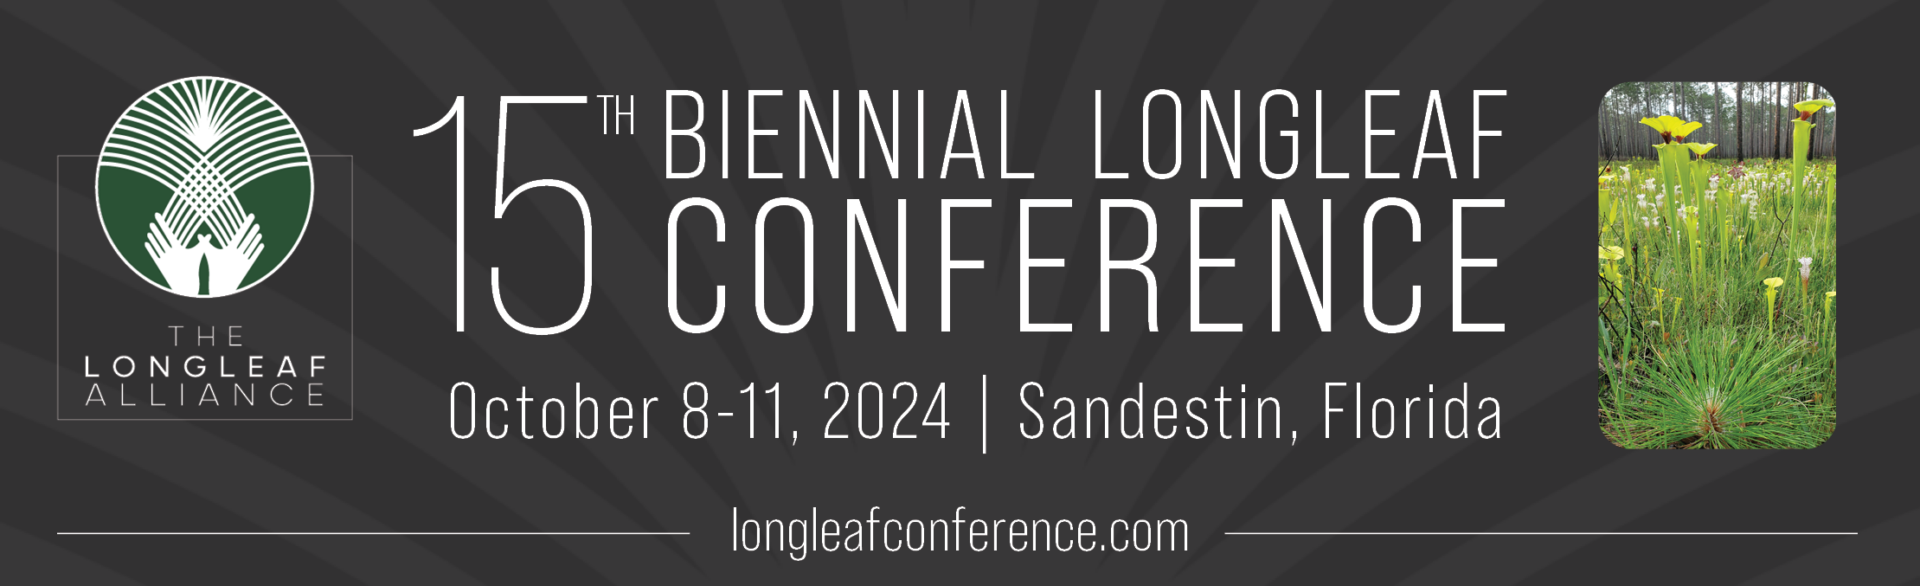 Longleaf Conference Save-the-date 12.11.2023 resized